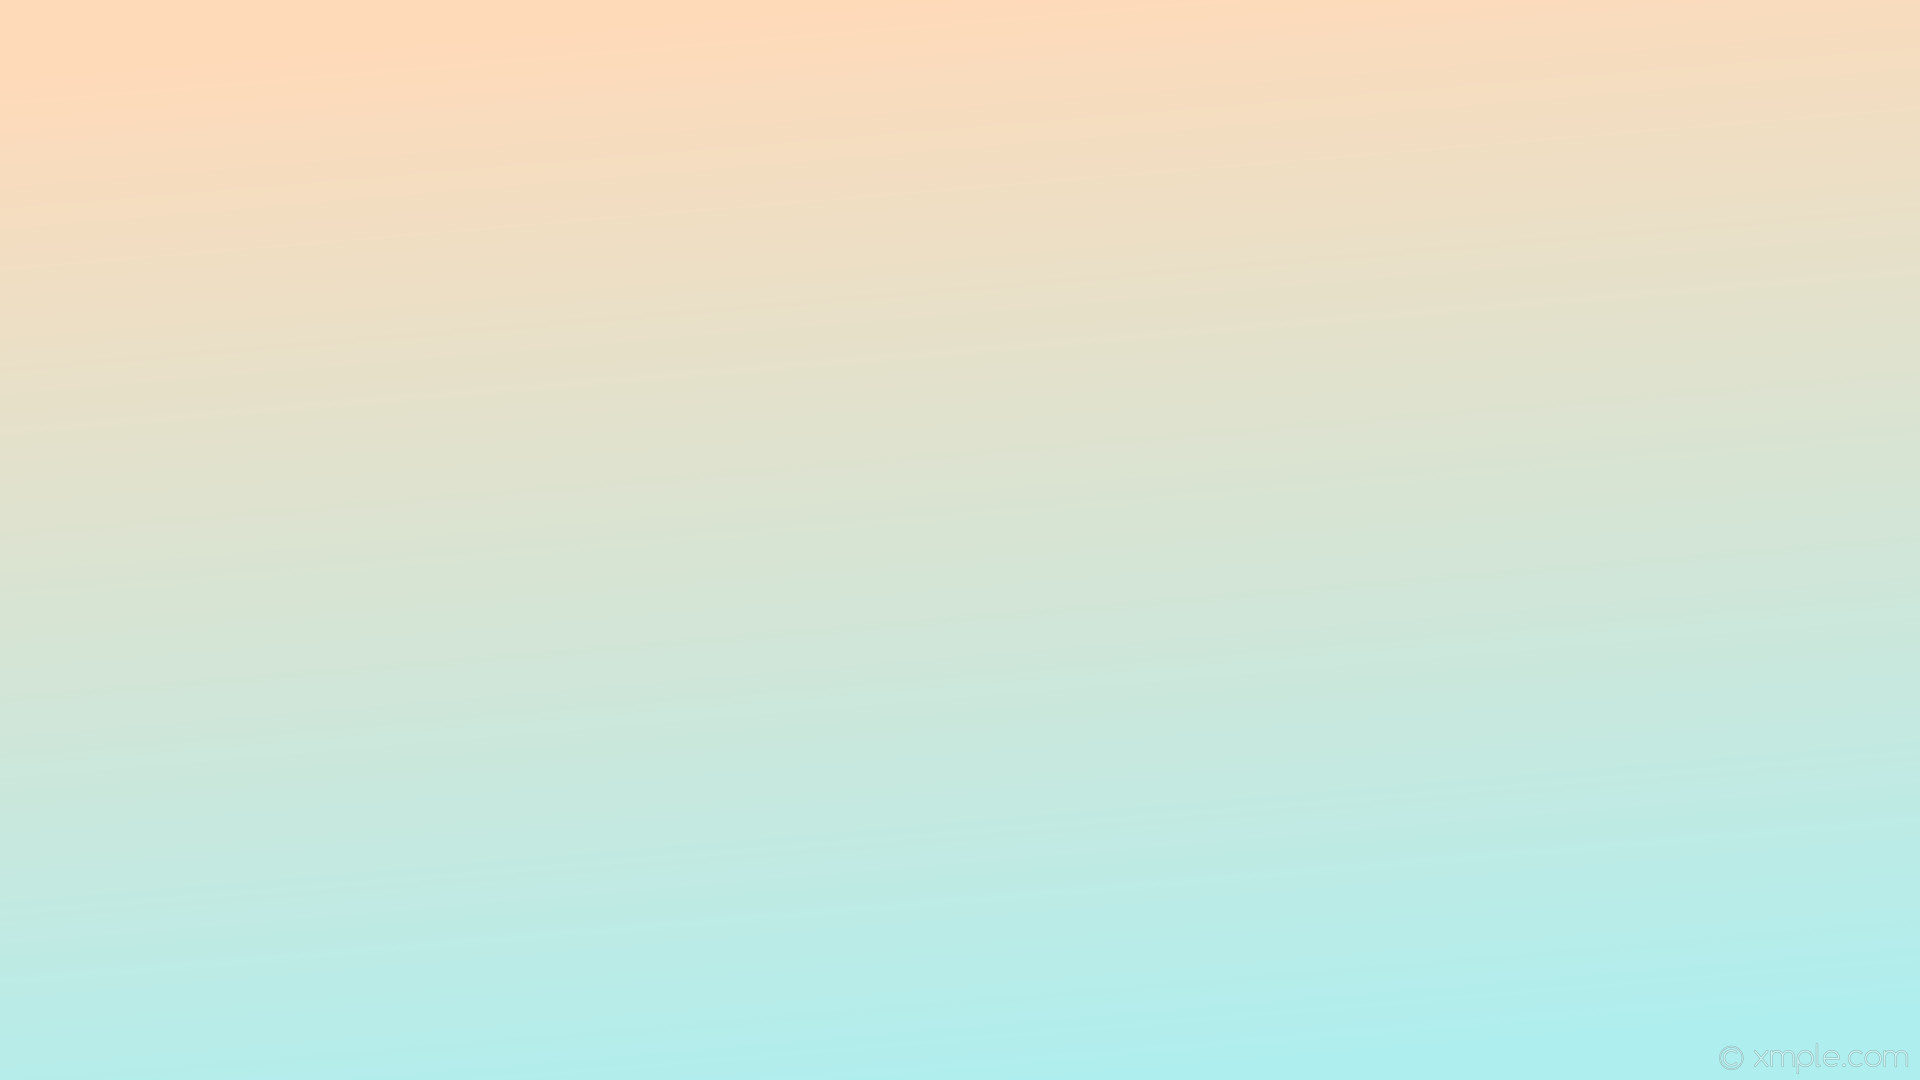 1920x1080 wallpaper linear yellow gradient blue peach puff pale turquoise #ffdab9  #afeeee 105Â°